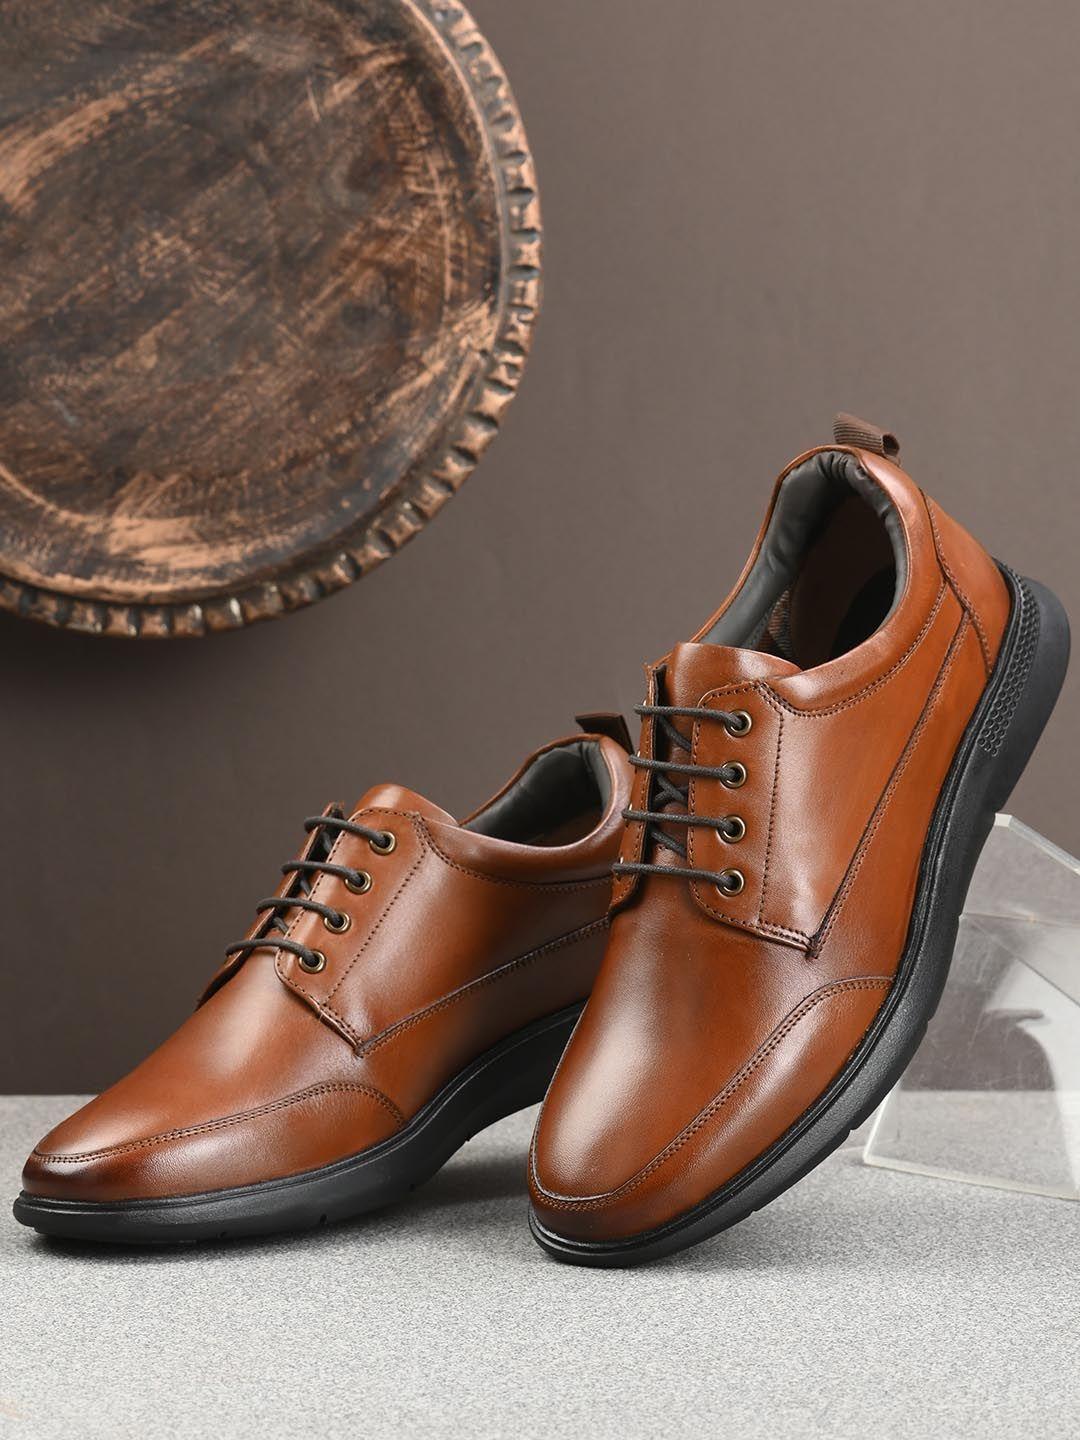 house of pataudi men leather formal derbys shoes